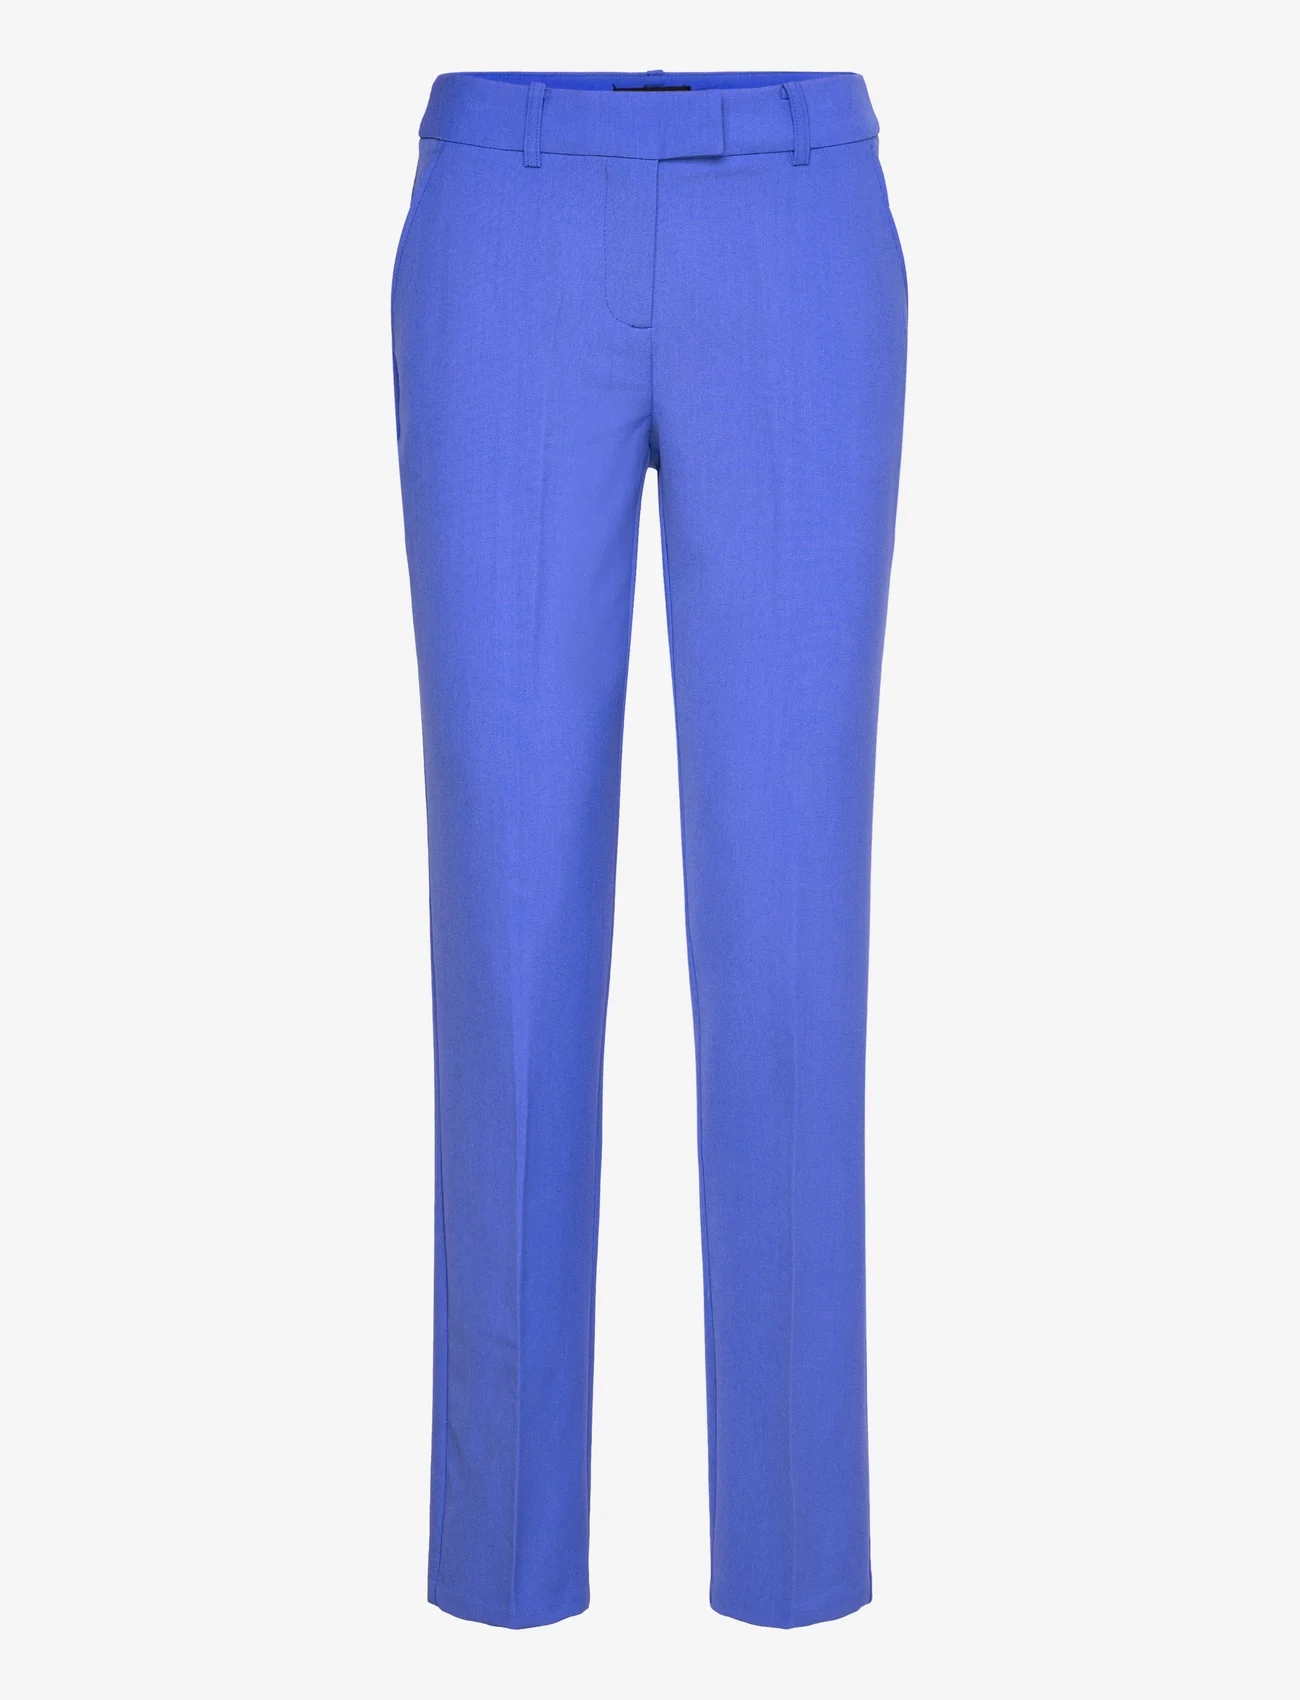 Brandtex - Suiting pants - formell - clear blue - 0